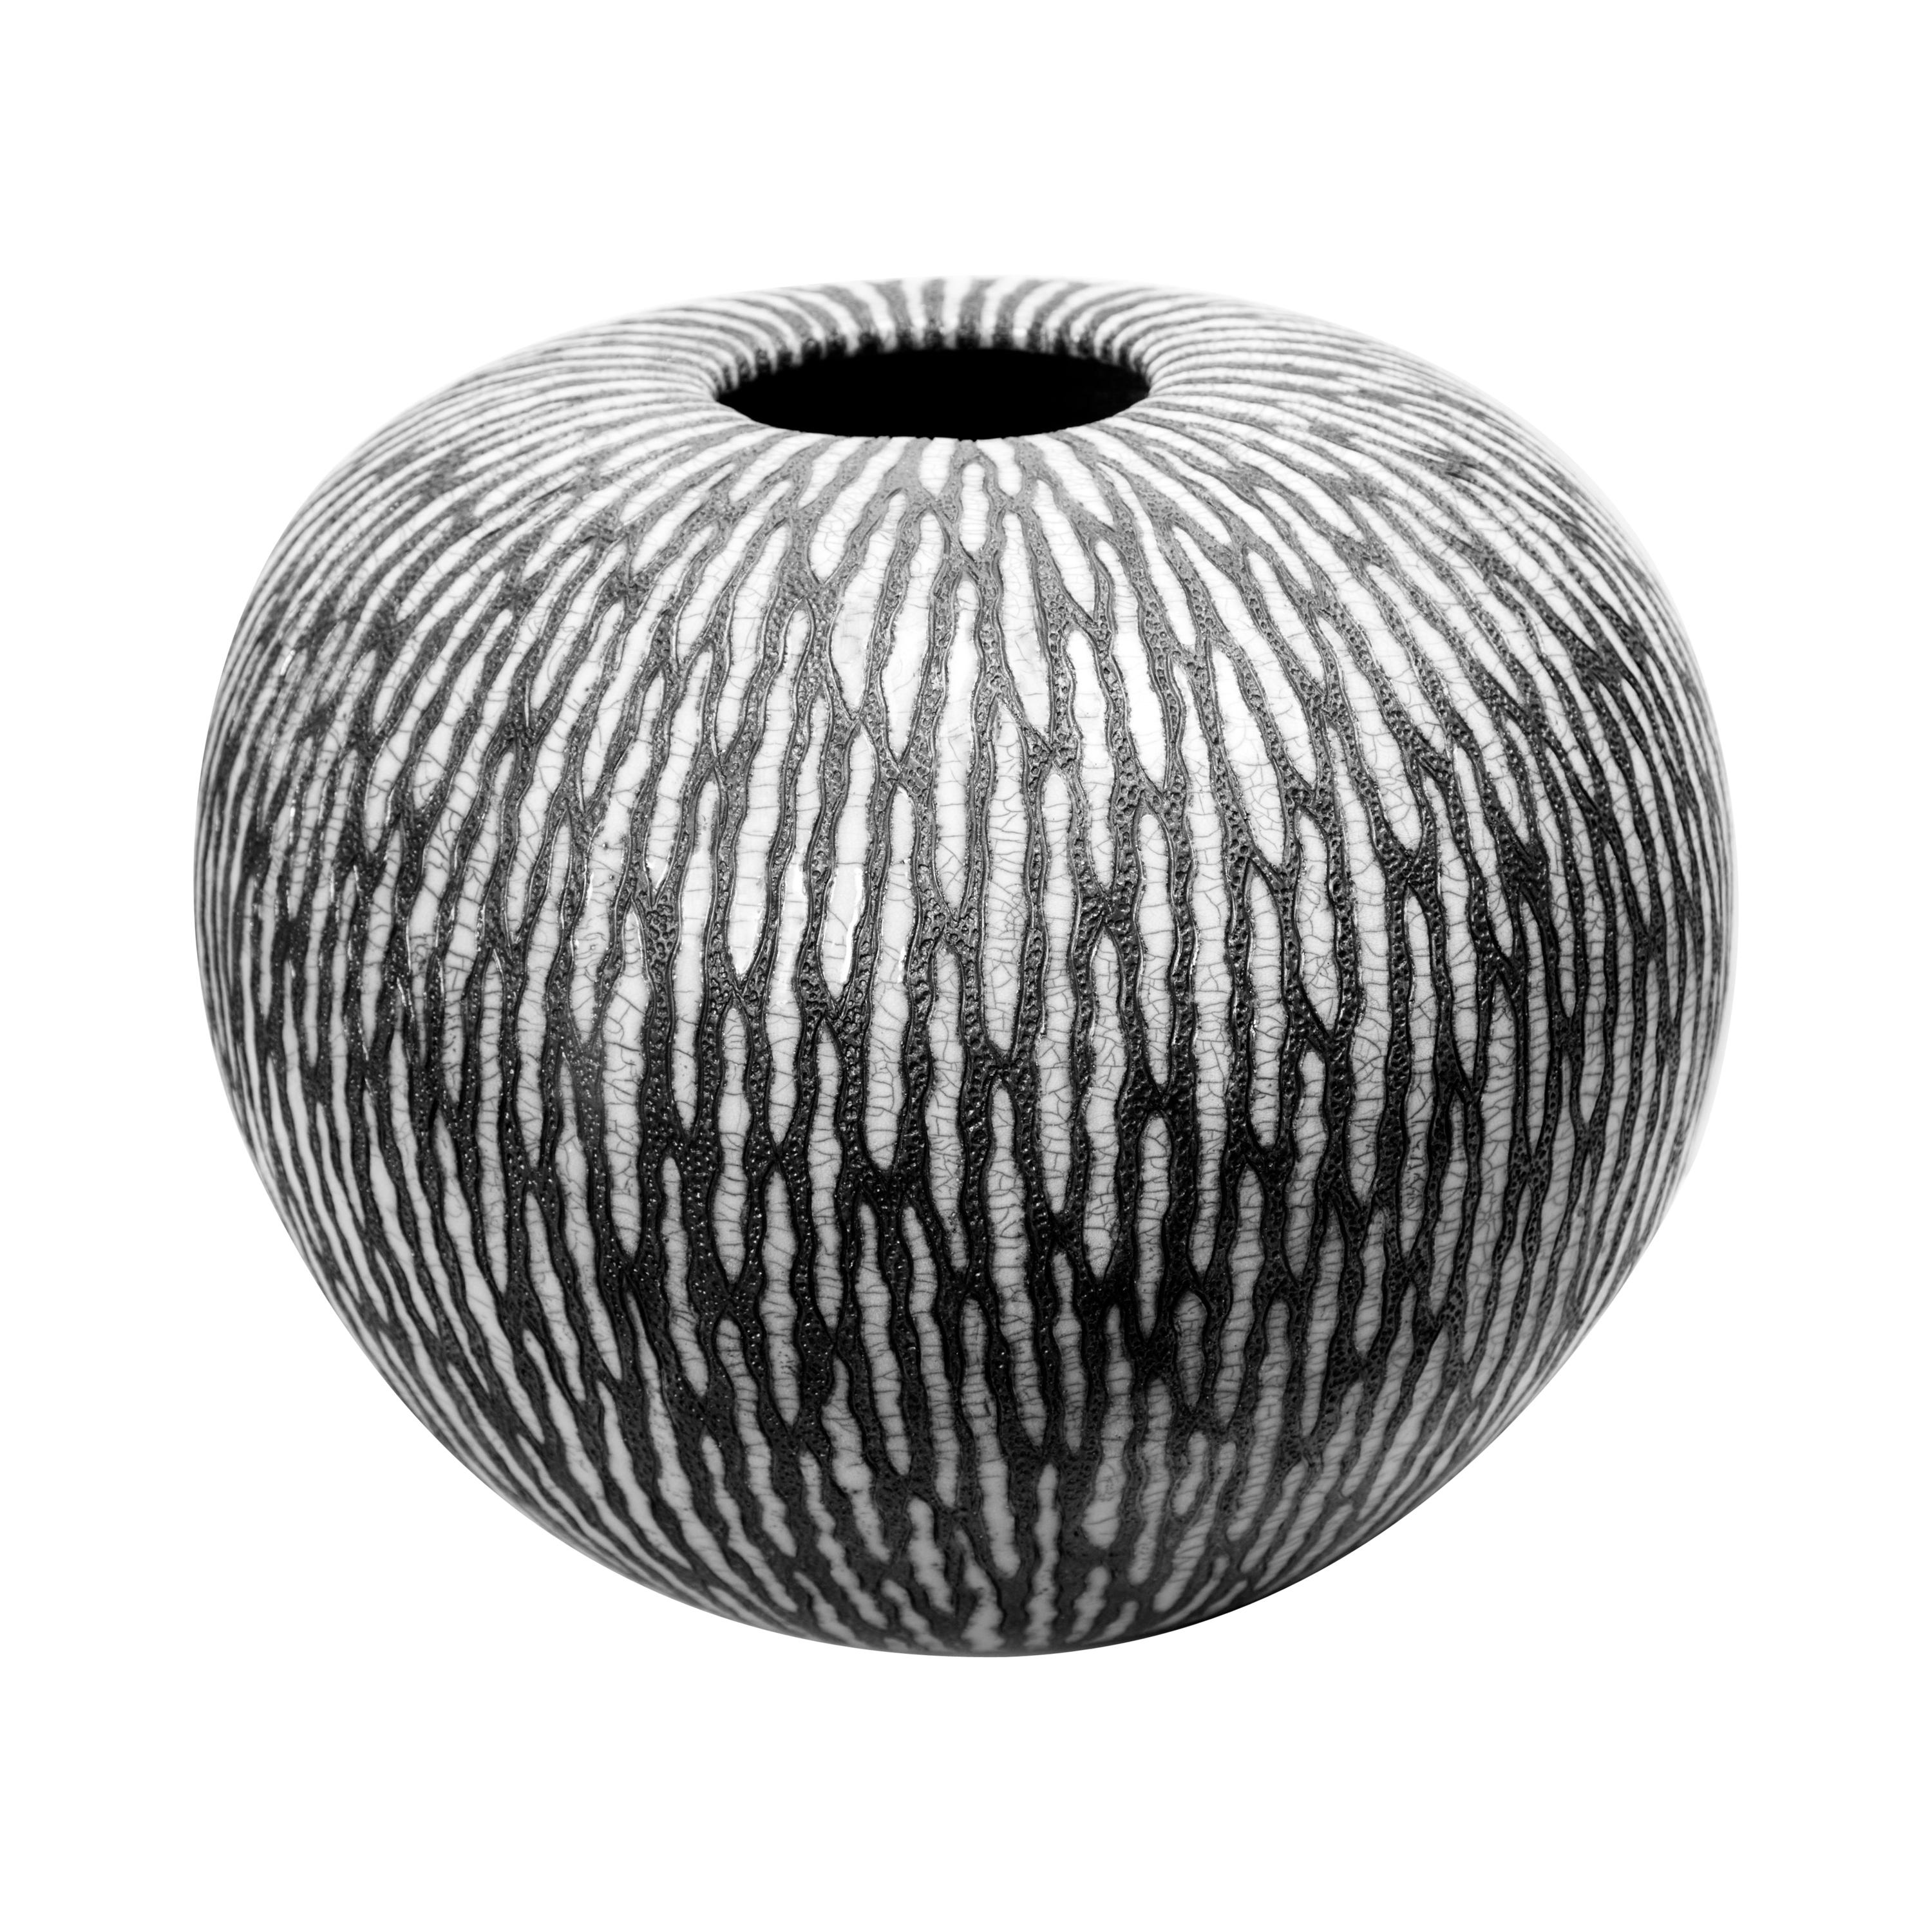 Contemporary Black and White Ceramic Globe Vase, Boule Strate, Large